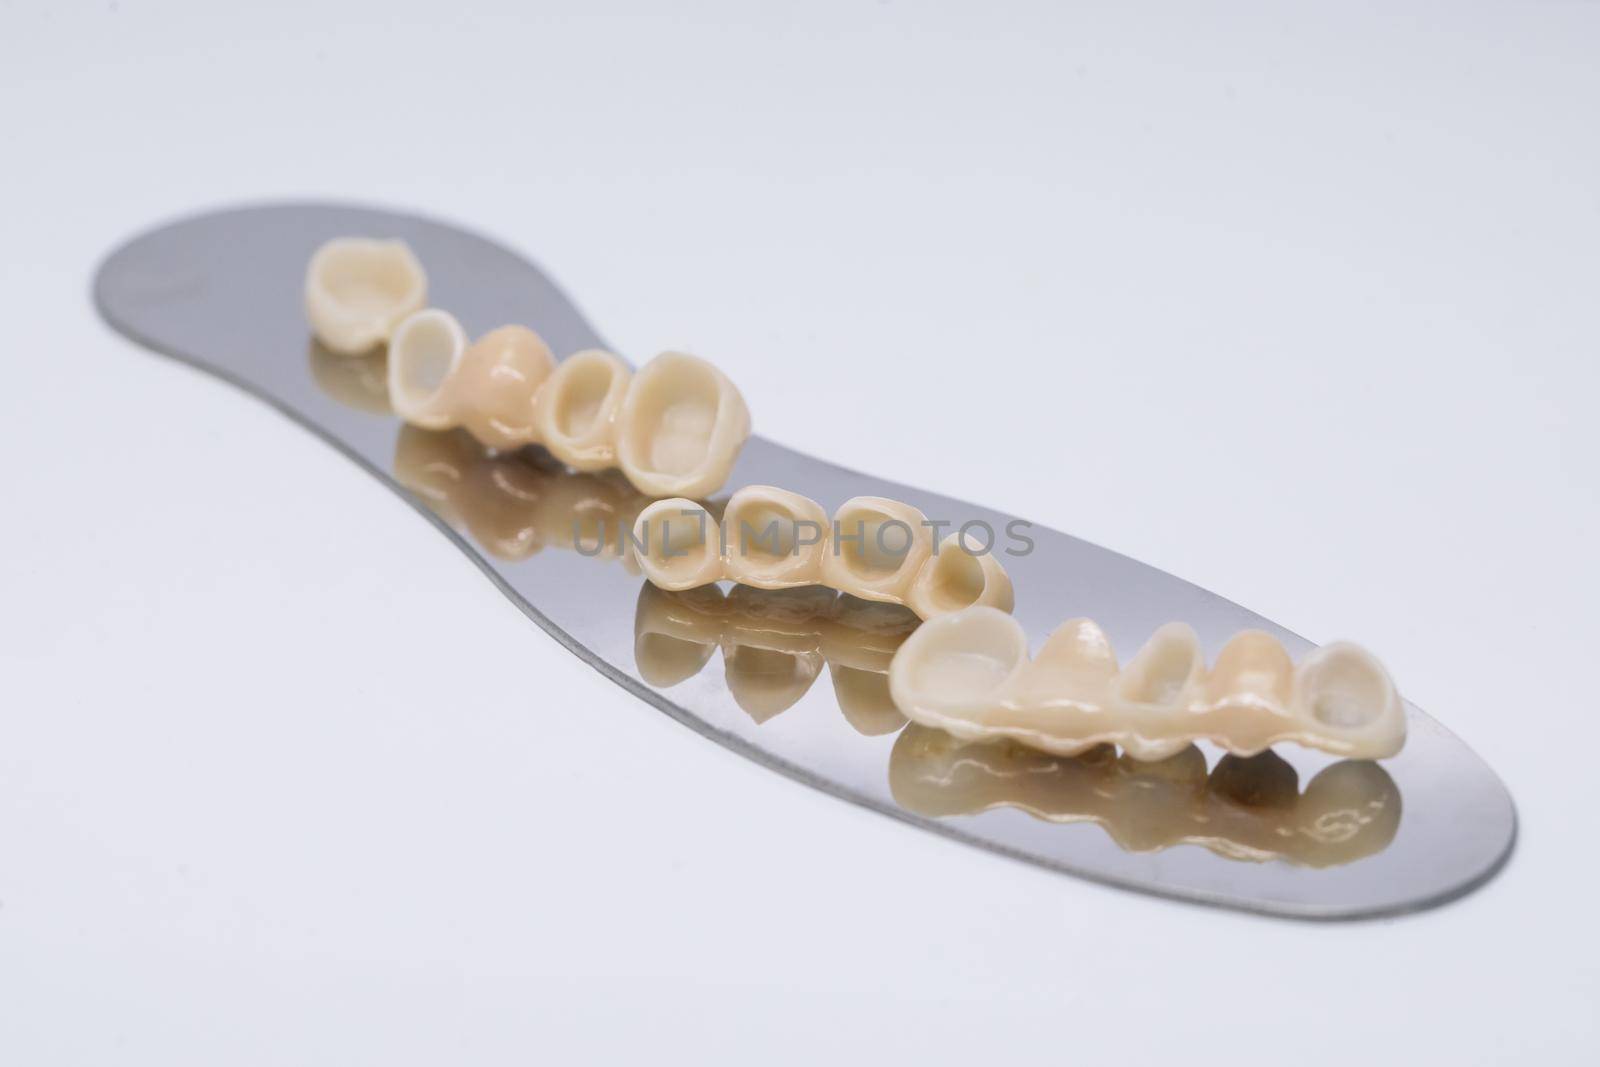 Zirconium tooth crown Isolate on wite background. Aesthetic restoration of tooth loss. Metal free ceramic dental crowns. by uflypro